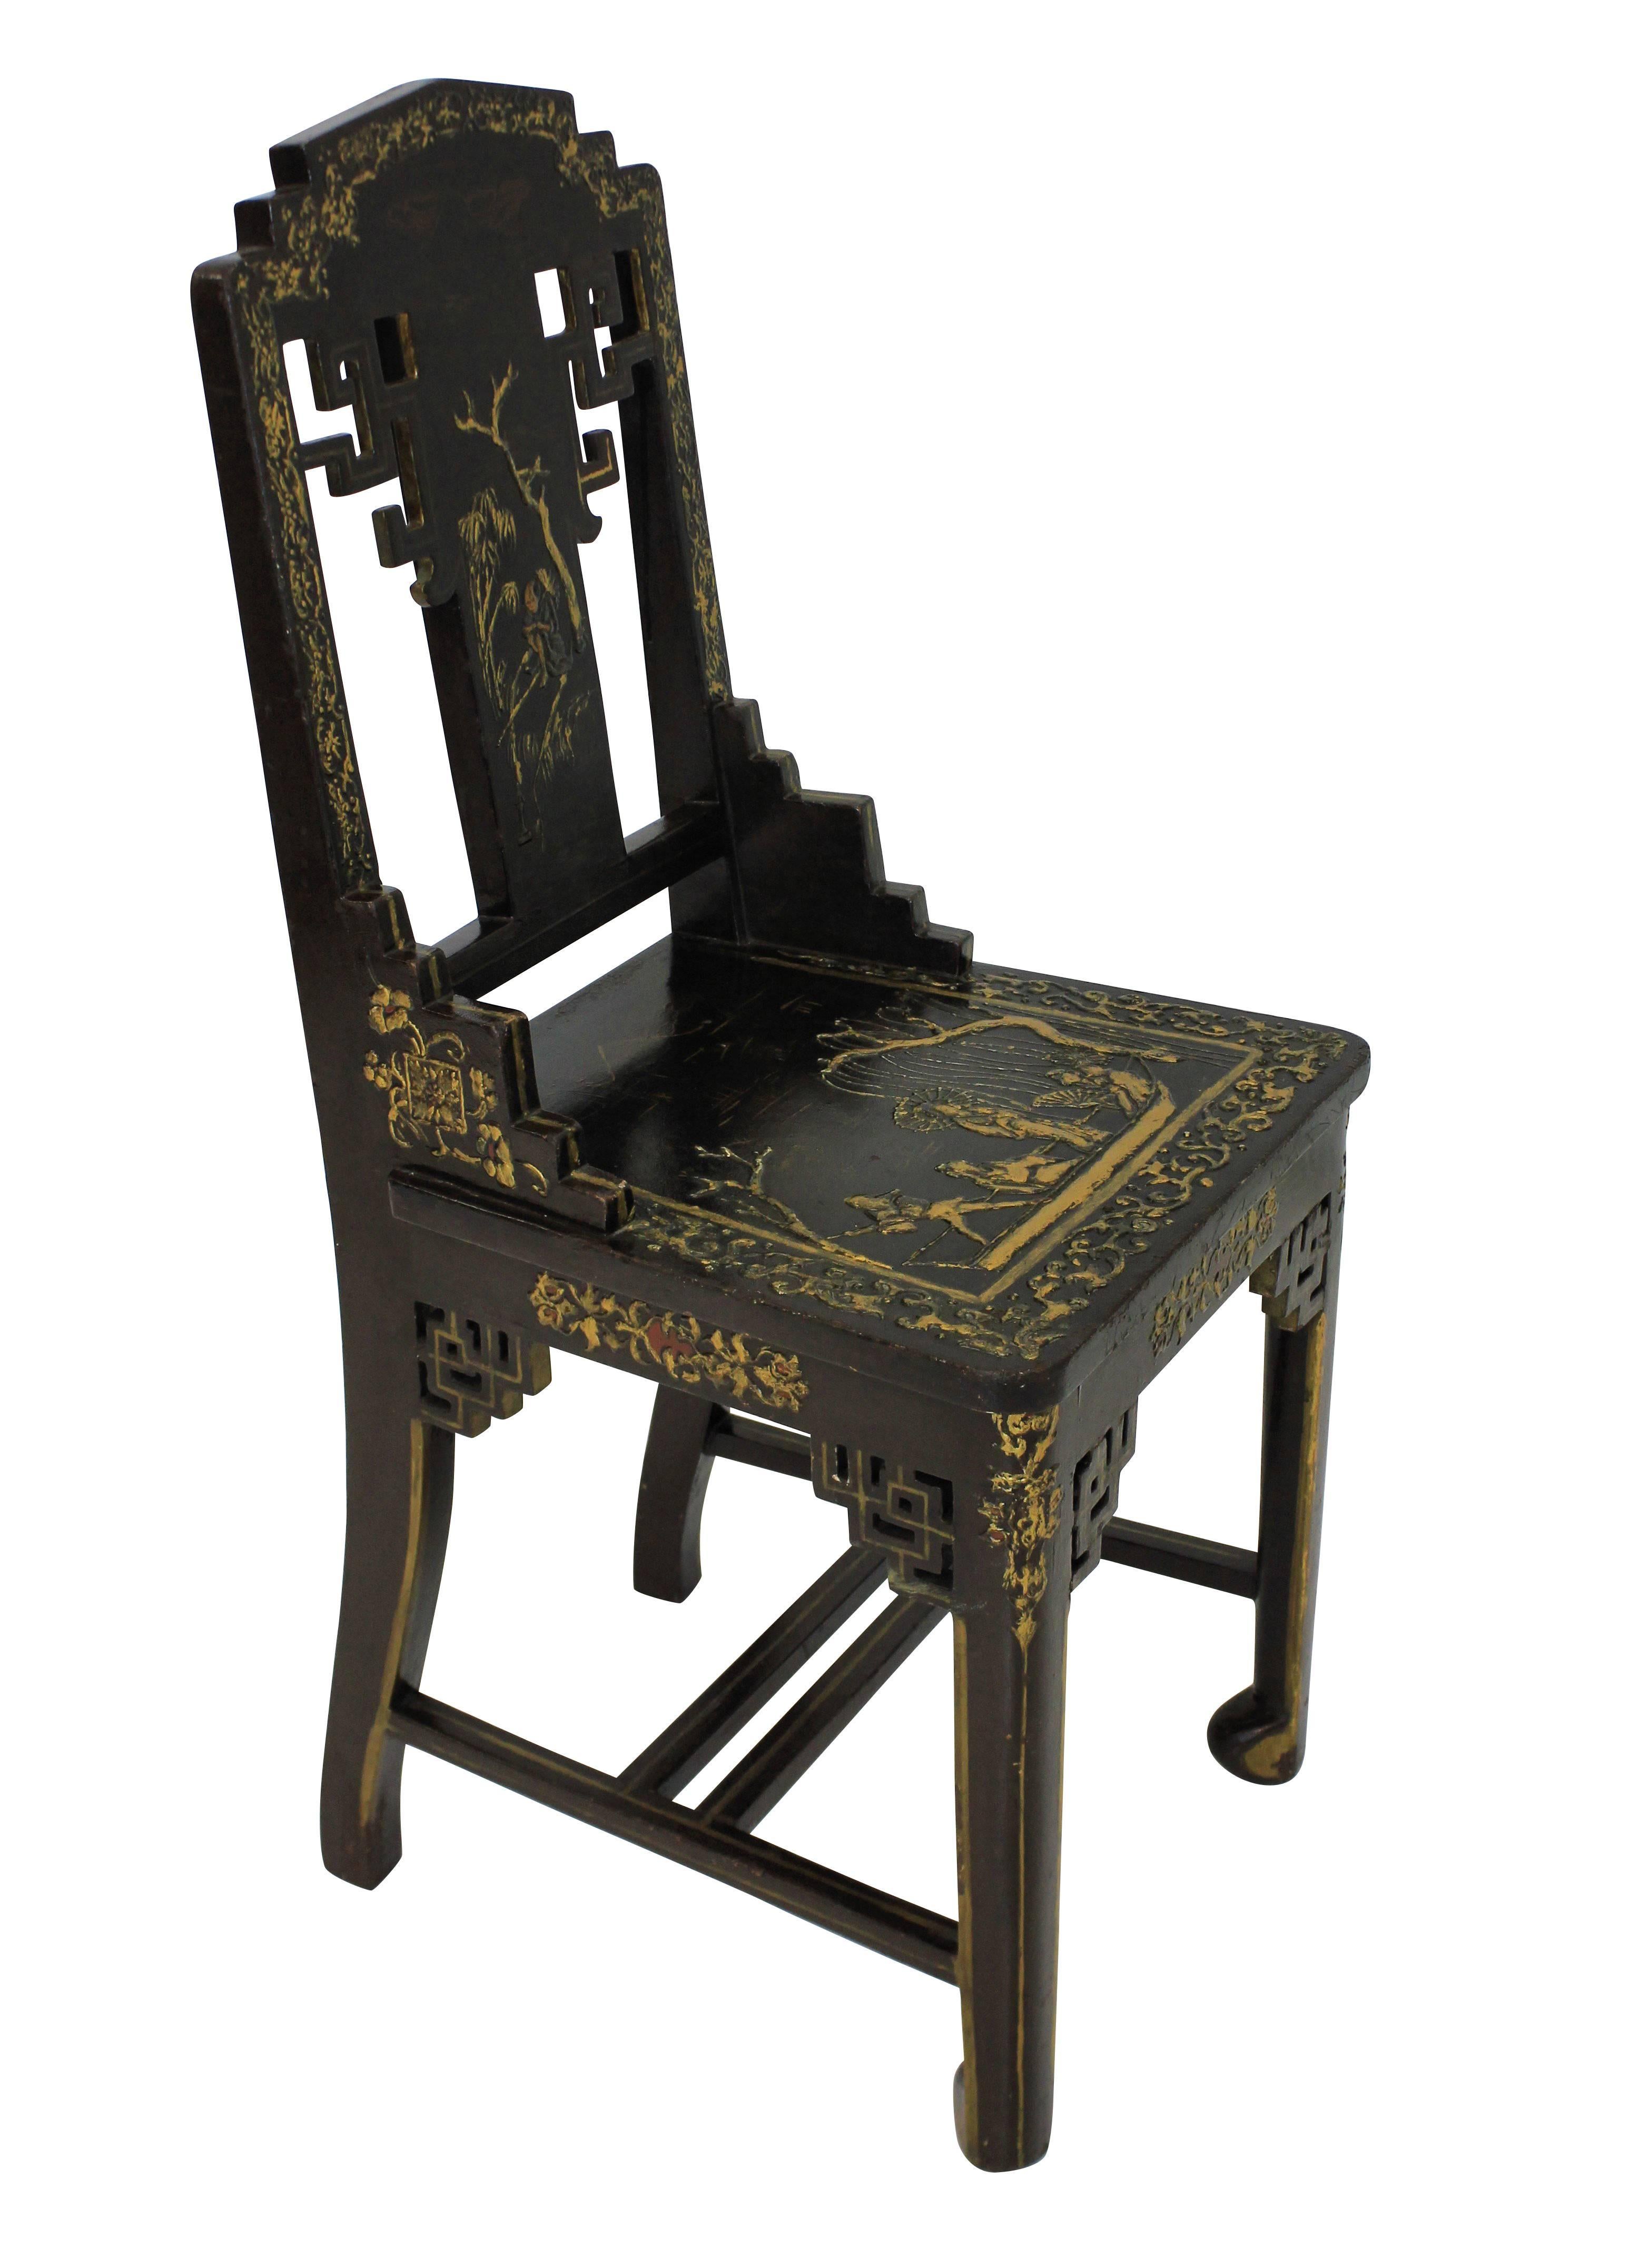 A pair of Chinese chairs in brown lacquer and gold leaf.
    